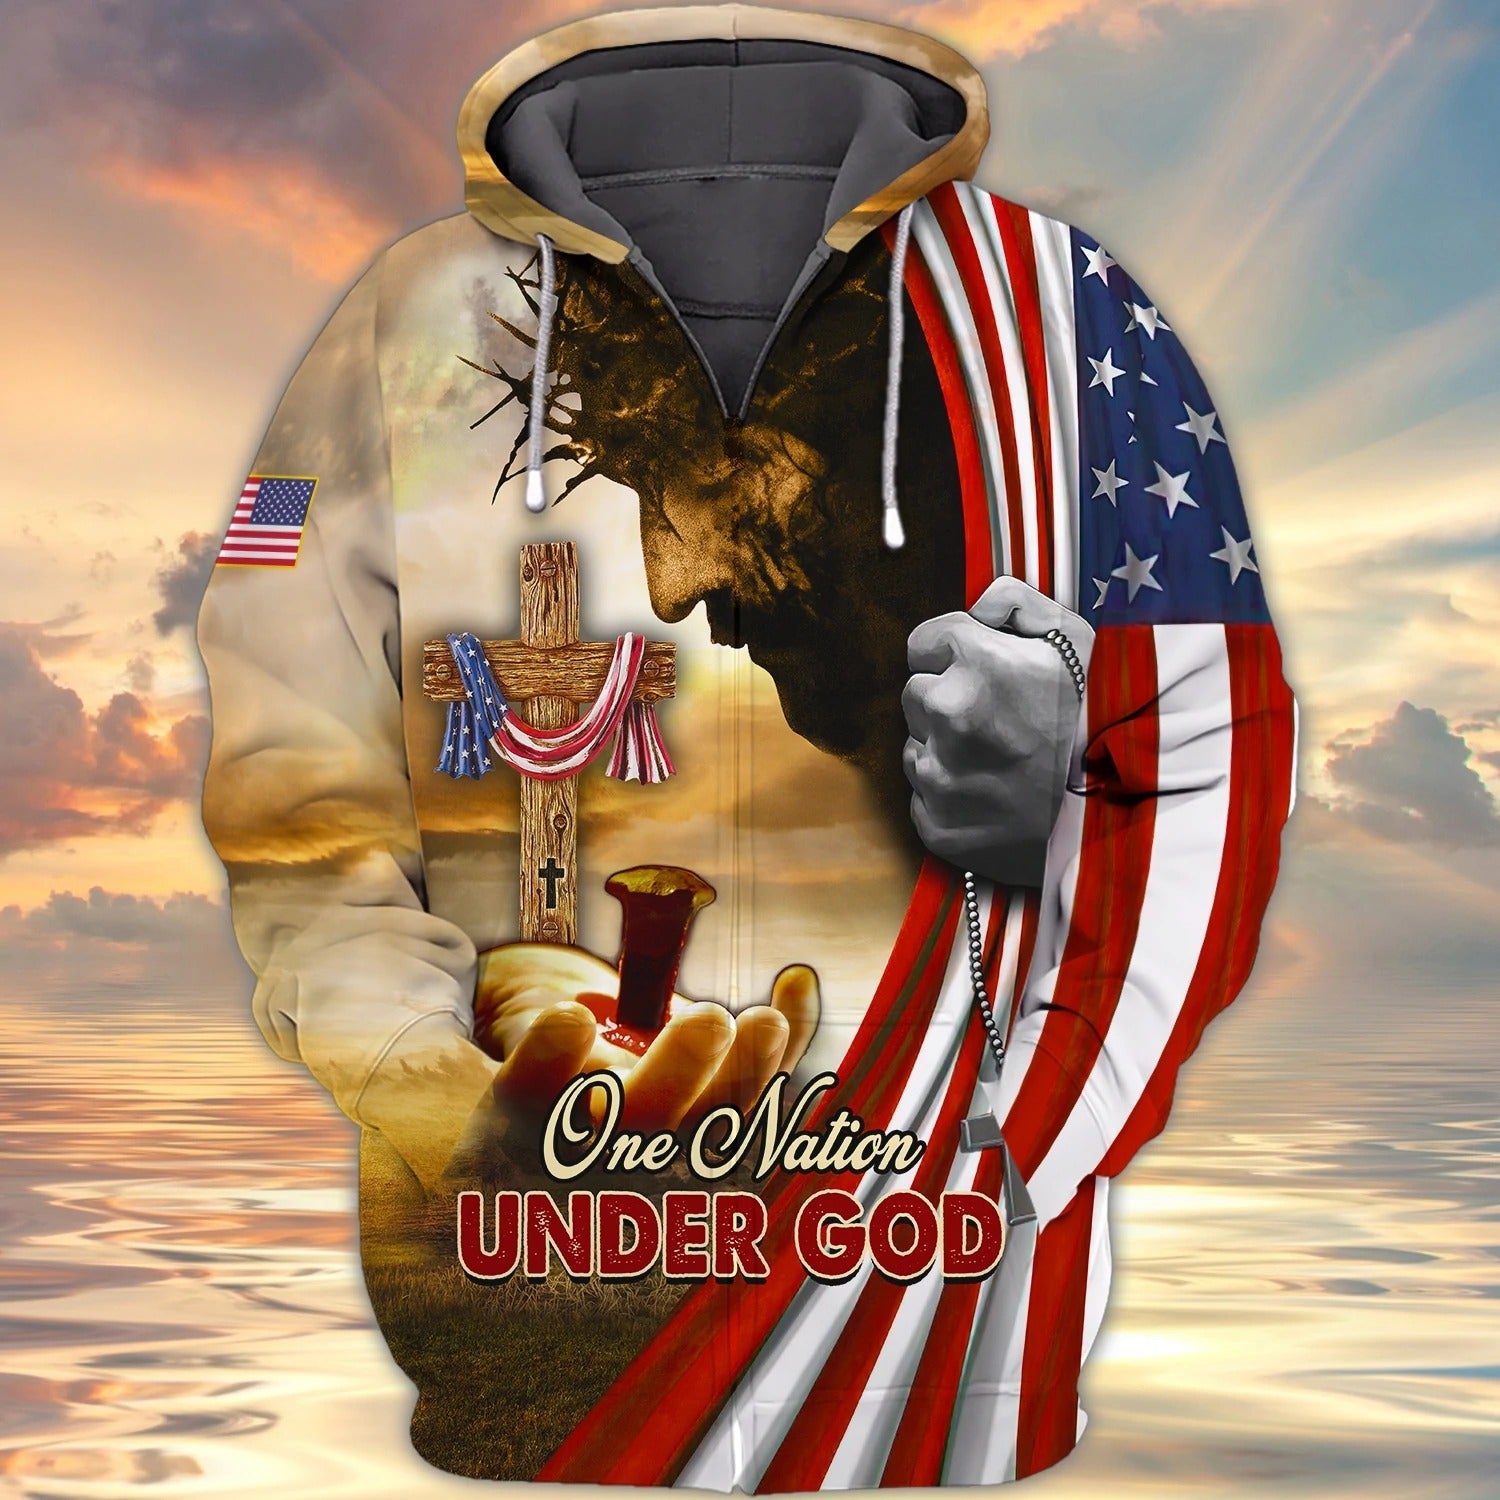 One Nation Under God Christian 3D Full Printed Shirts/ Independence Day Hoodie 3D Tee Shirt/ Patriotice 3D Tshirts